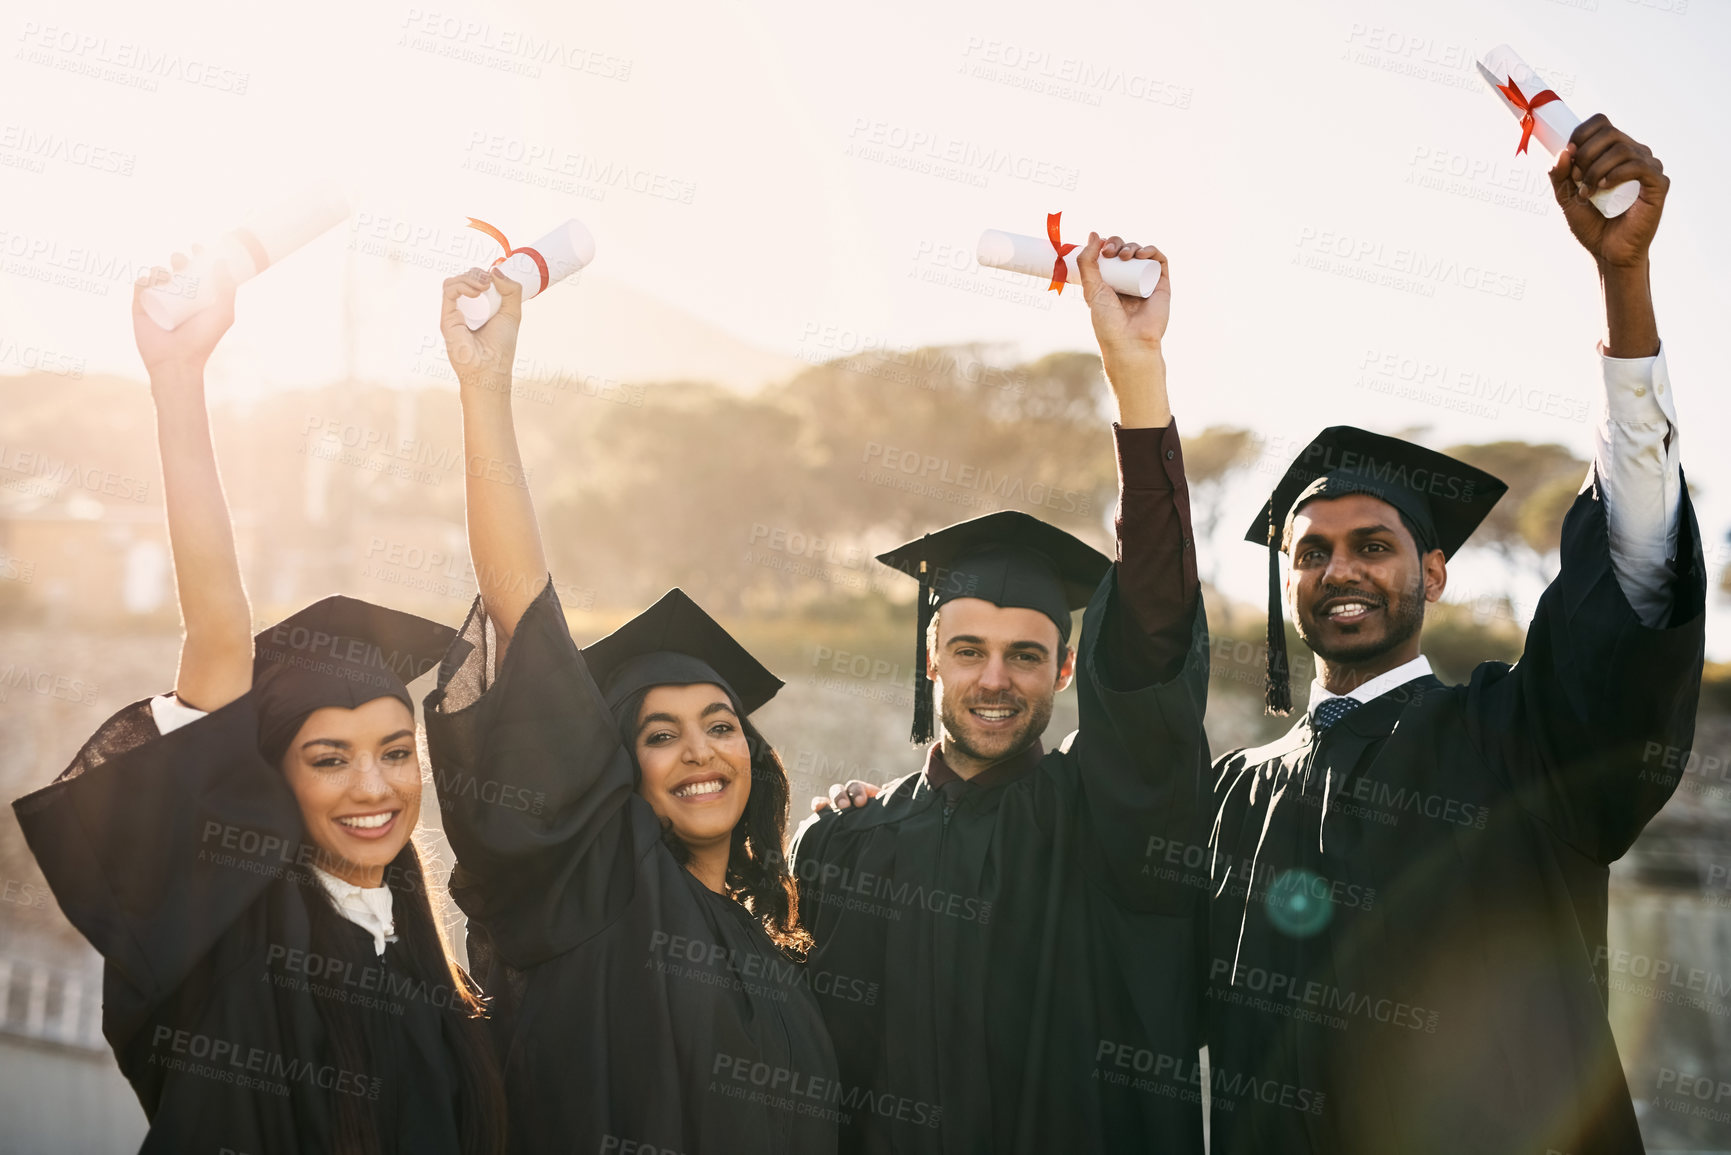 Buy stock photo Portrait of a group of students celebrating with their diplomas on graduation day